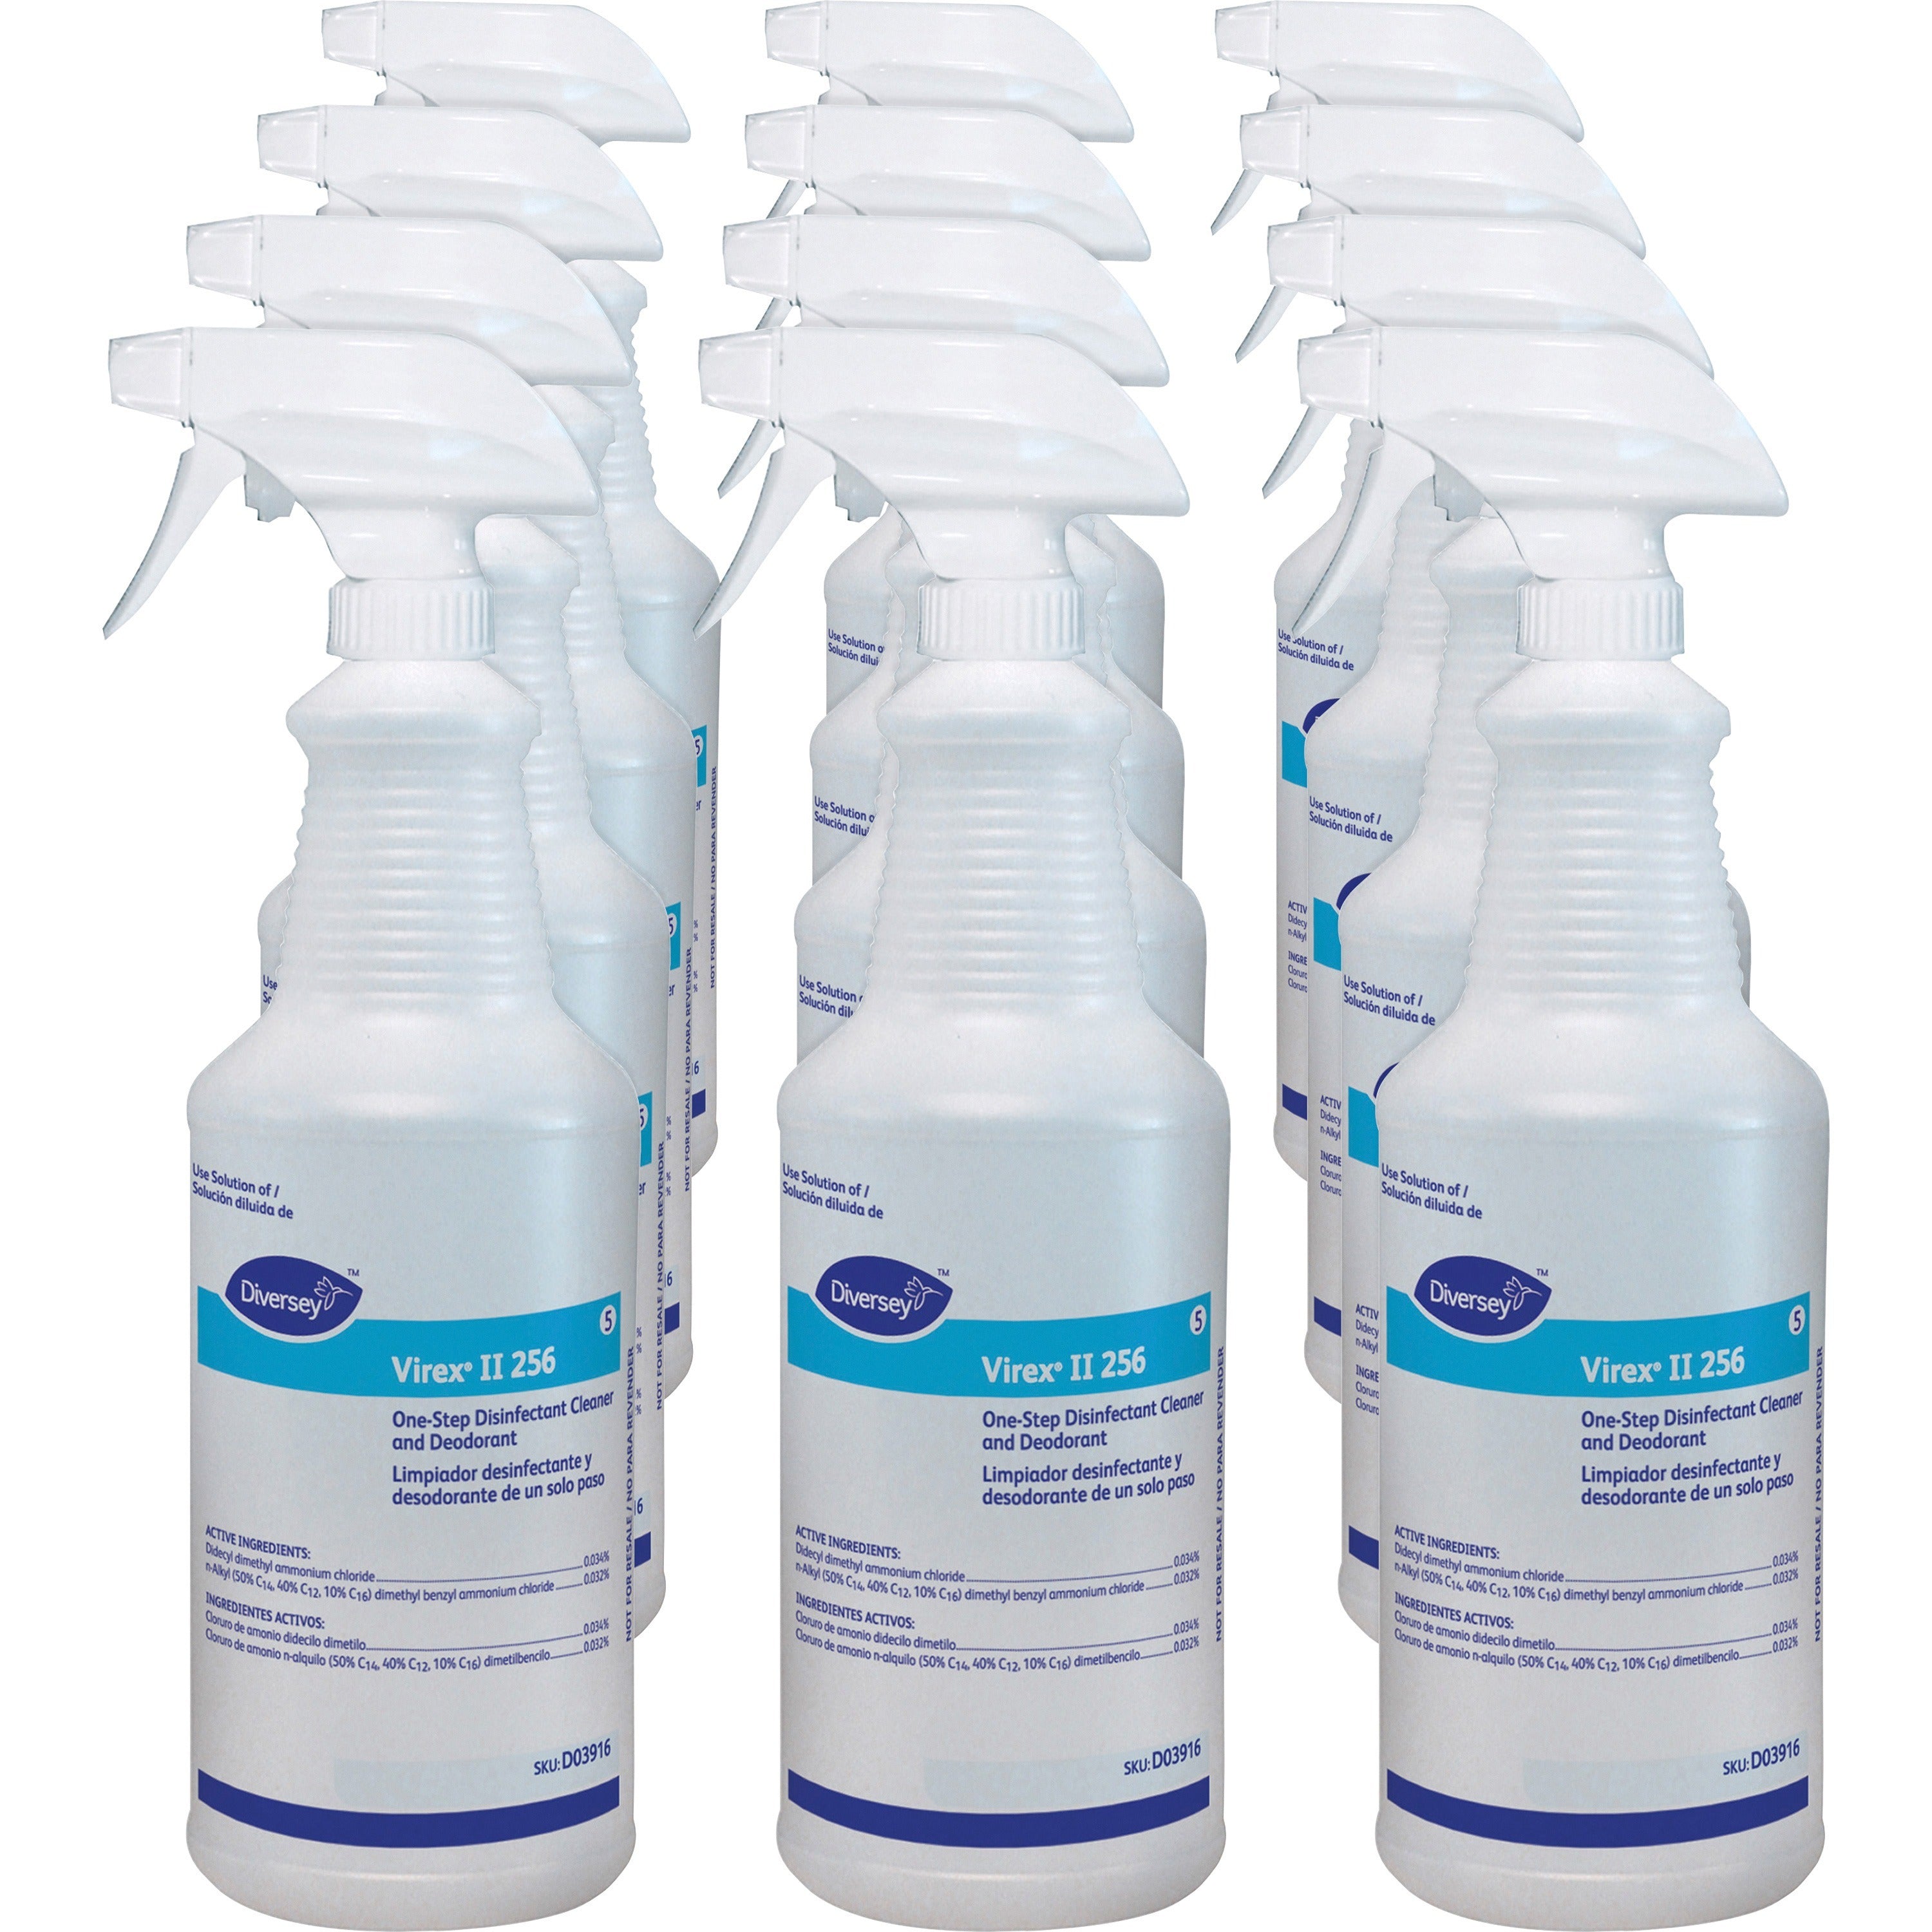 diversey-virex-ii-256-empty-spray-bottle-suitable-for-college-hospital-institution-medical-hotel-nursing-home-school-disinfecting-sturdy-comfortable-grip-disinfectant-2-carton_dvod03916ct - 1